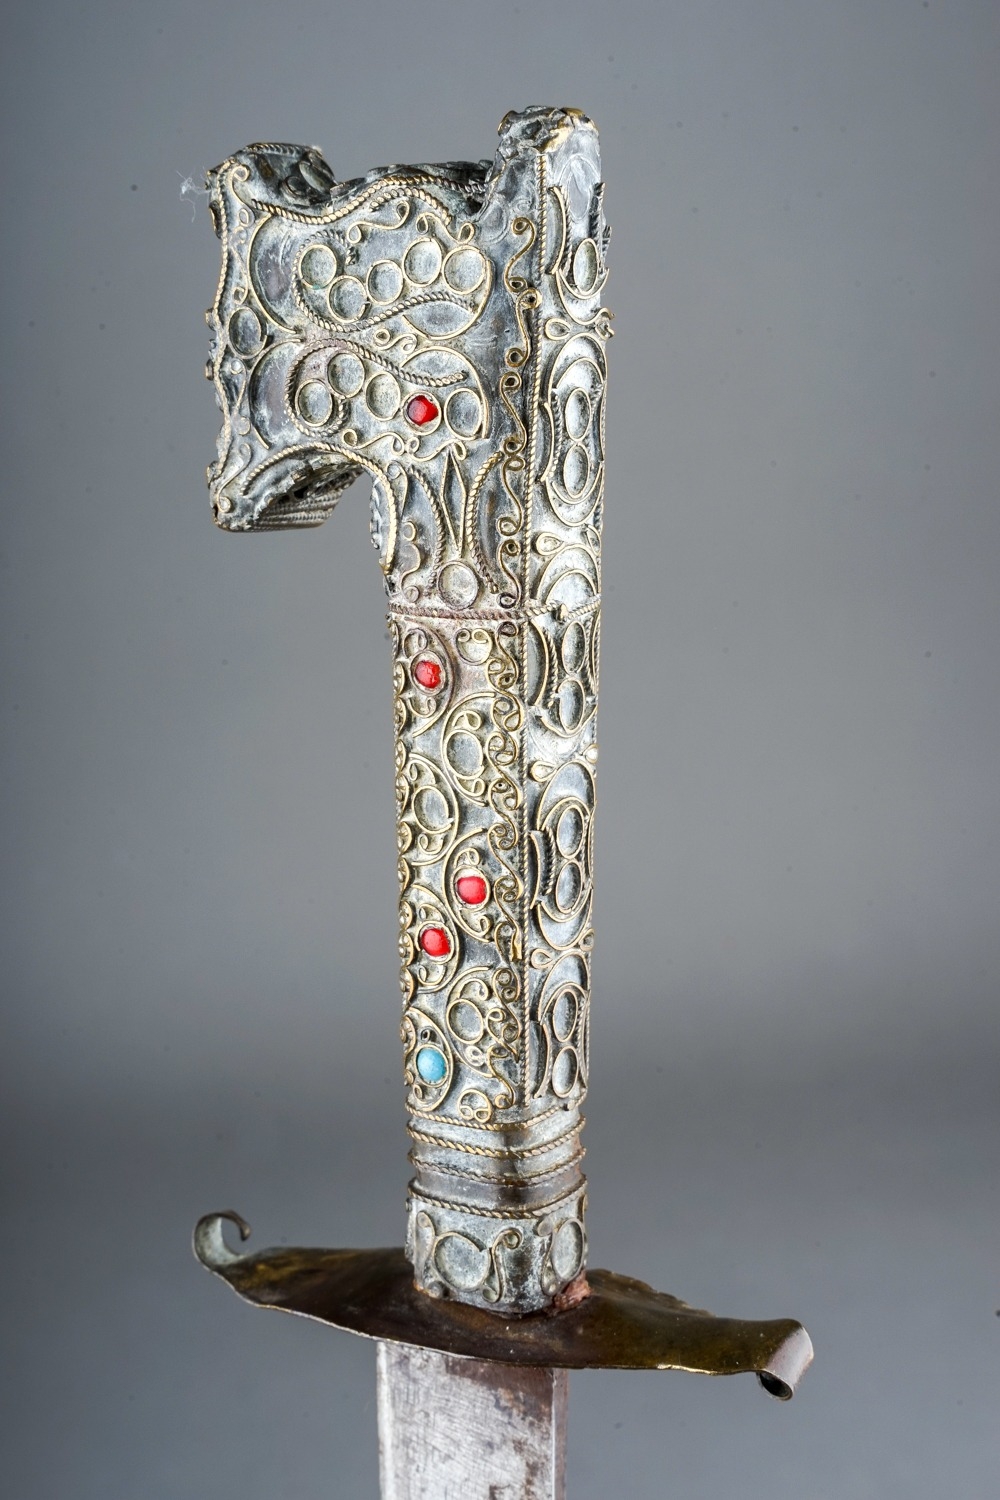 Antique Moroccan Nimcha dagger, wire work hilt set with turquoise and red stones. Length 39cm - Image 3 of 4